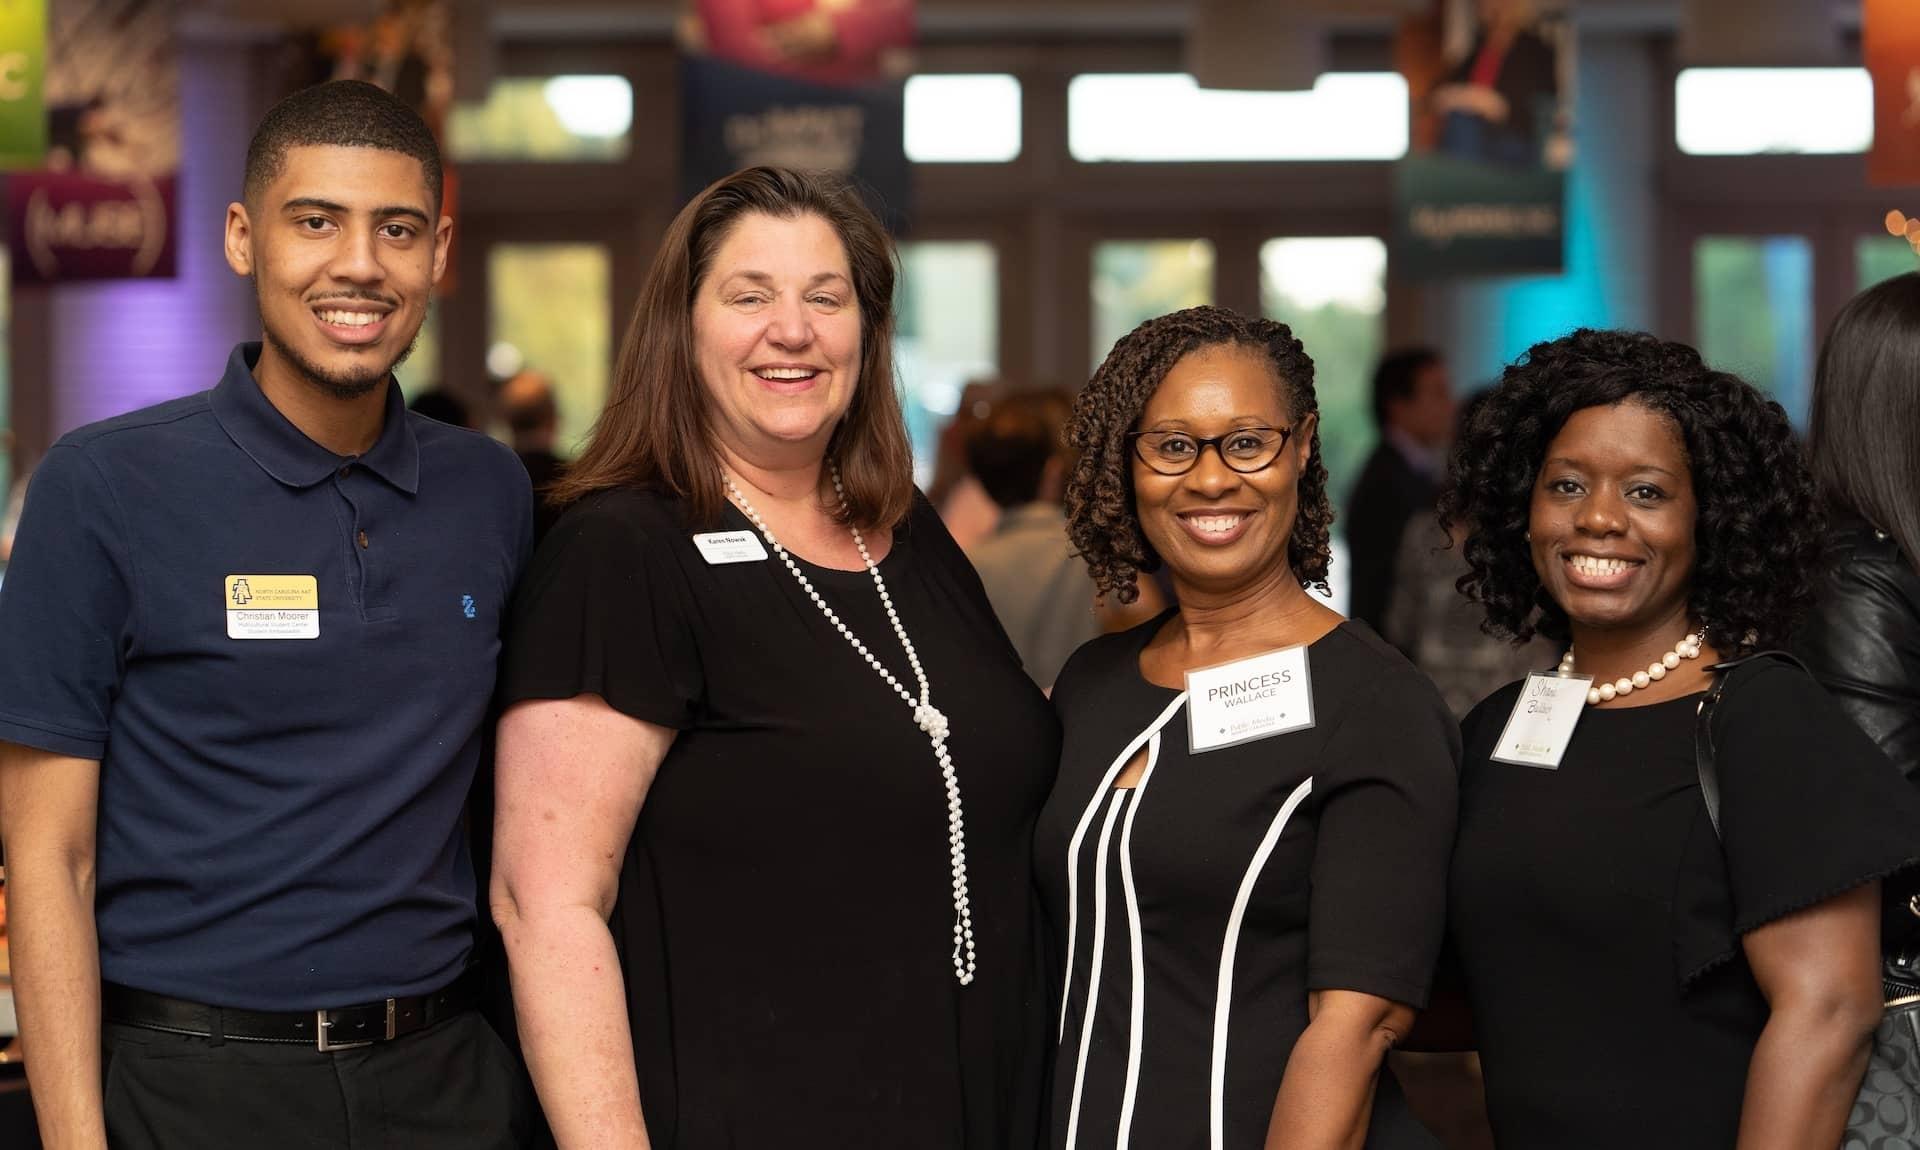 PBS North Carolina staff and volunteers at a 2019 event